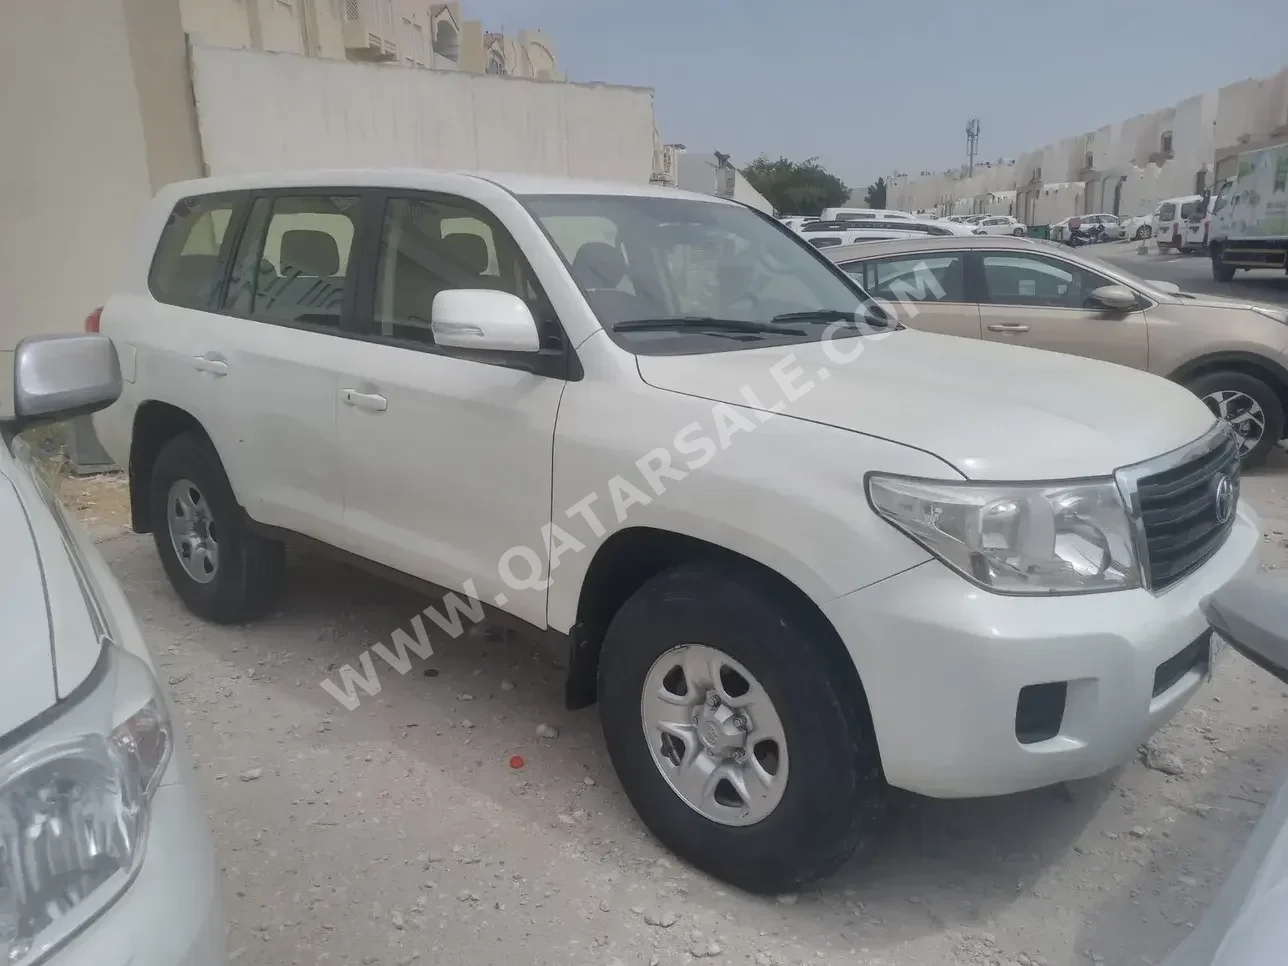 Toyota  Land Cruiser  G  2012  Automatic  28,000 Km  6 Cylinder  Four Wheel Drive (4WD)  SUV  White